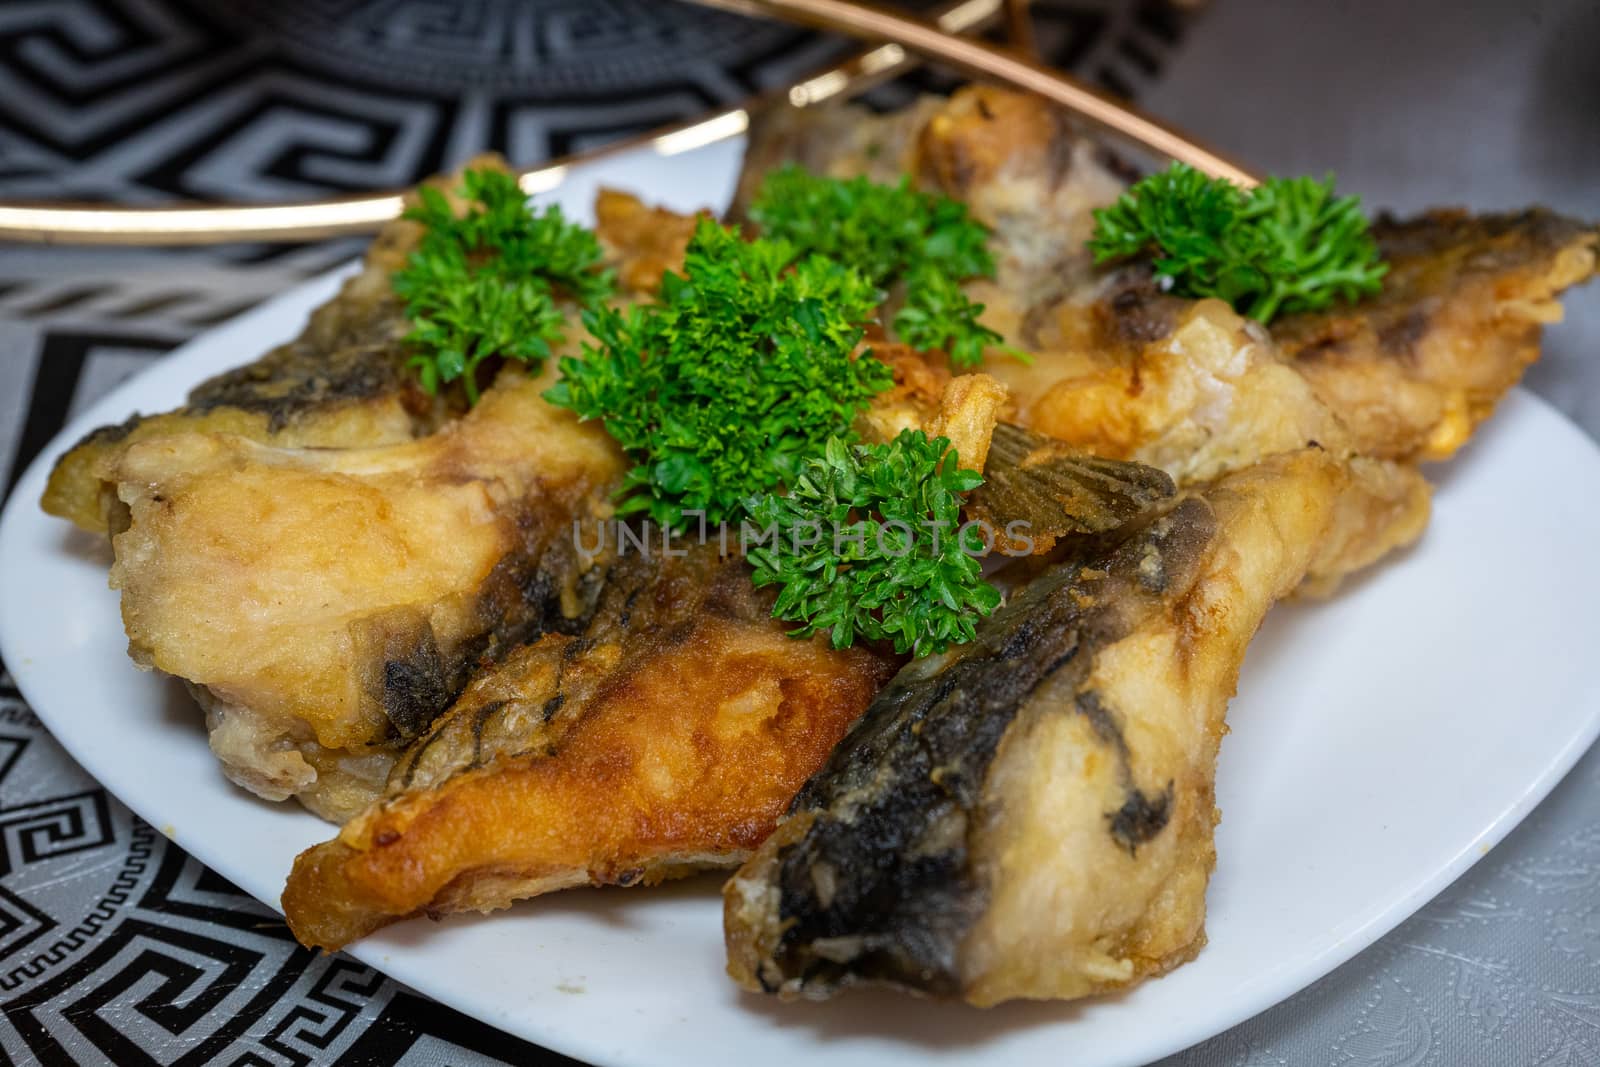 Golden fried fish decorated with parsley. Fried fish on a plate